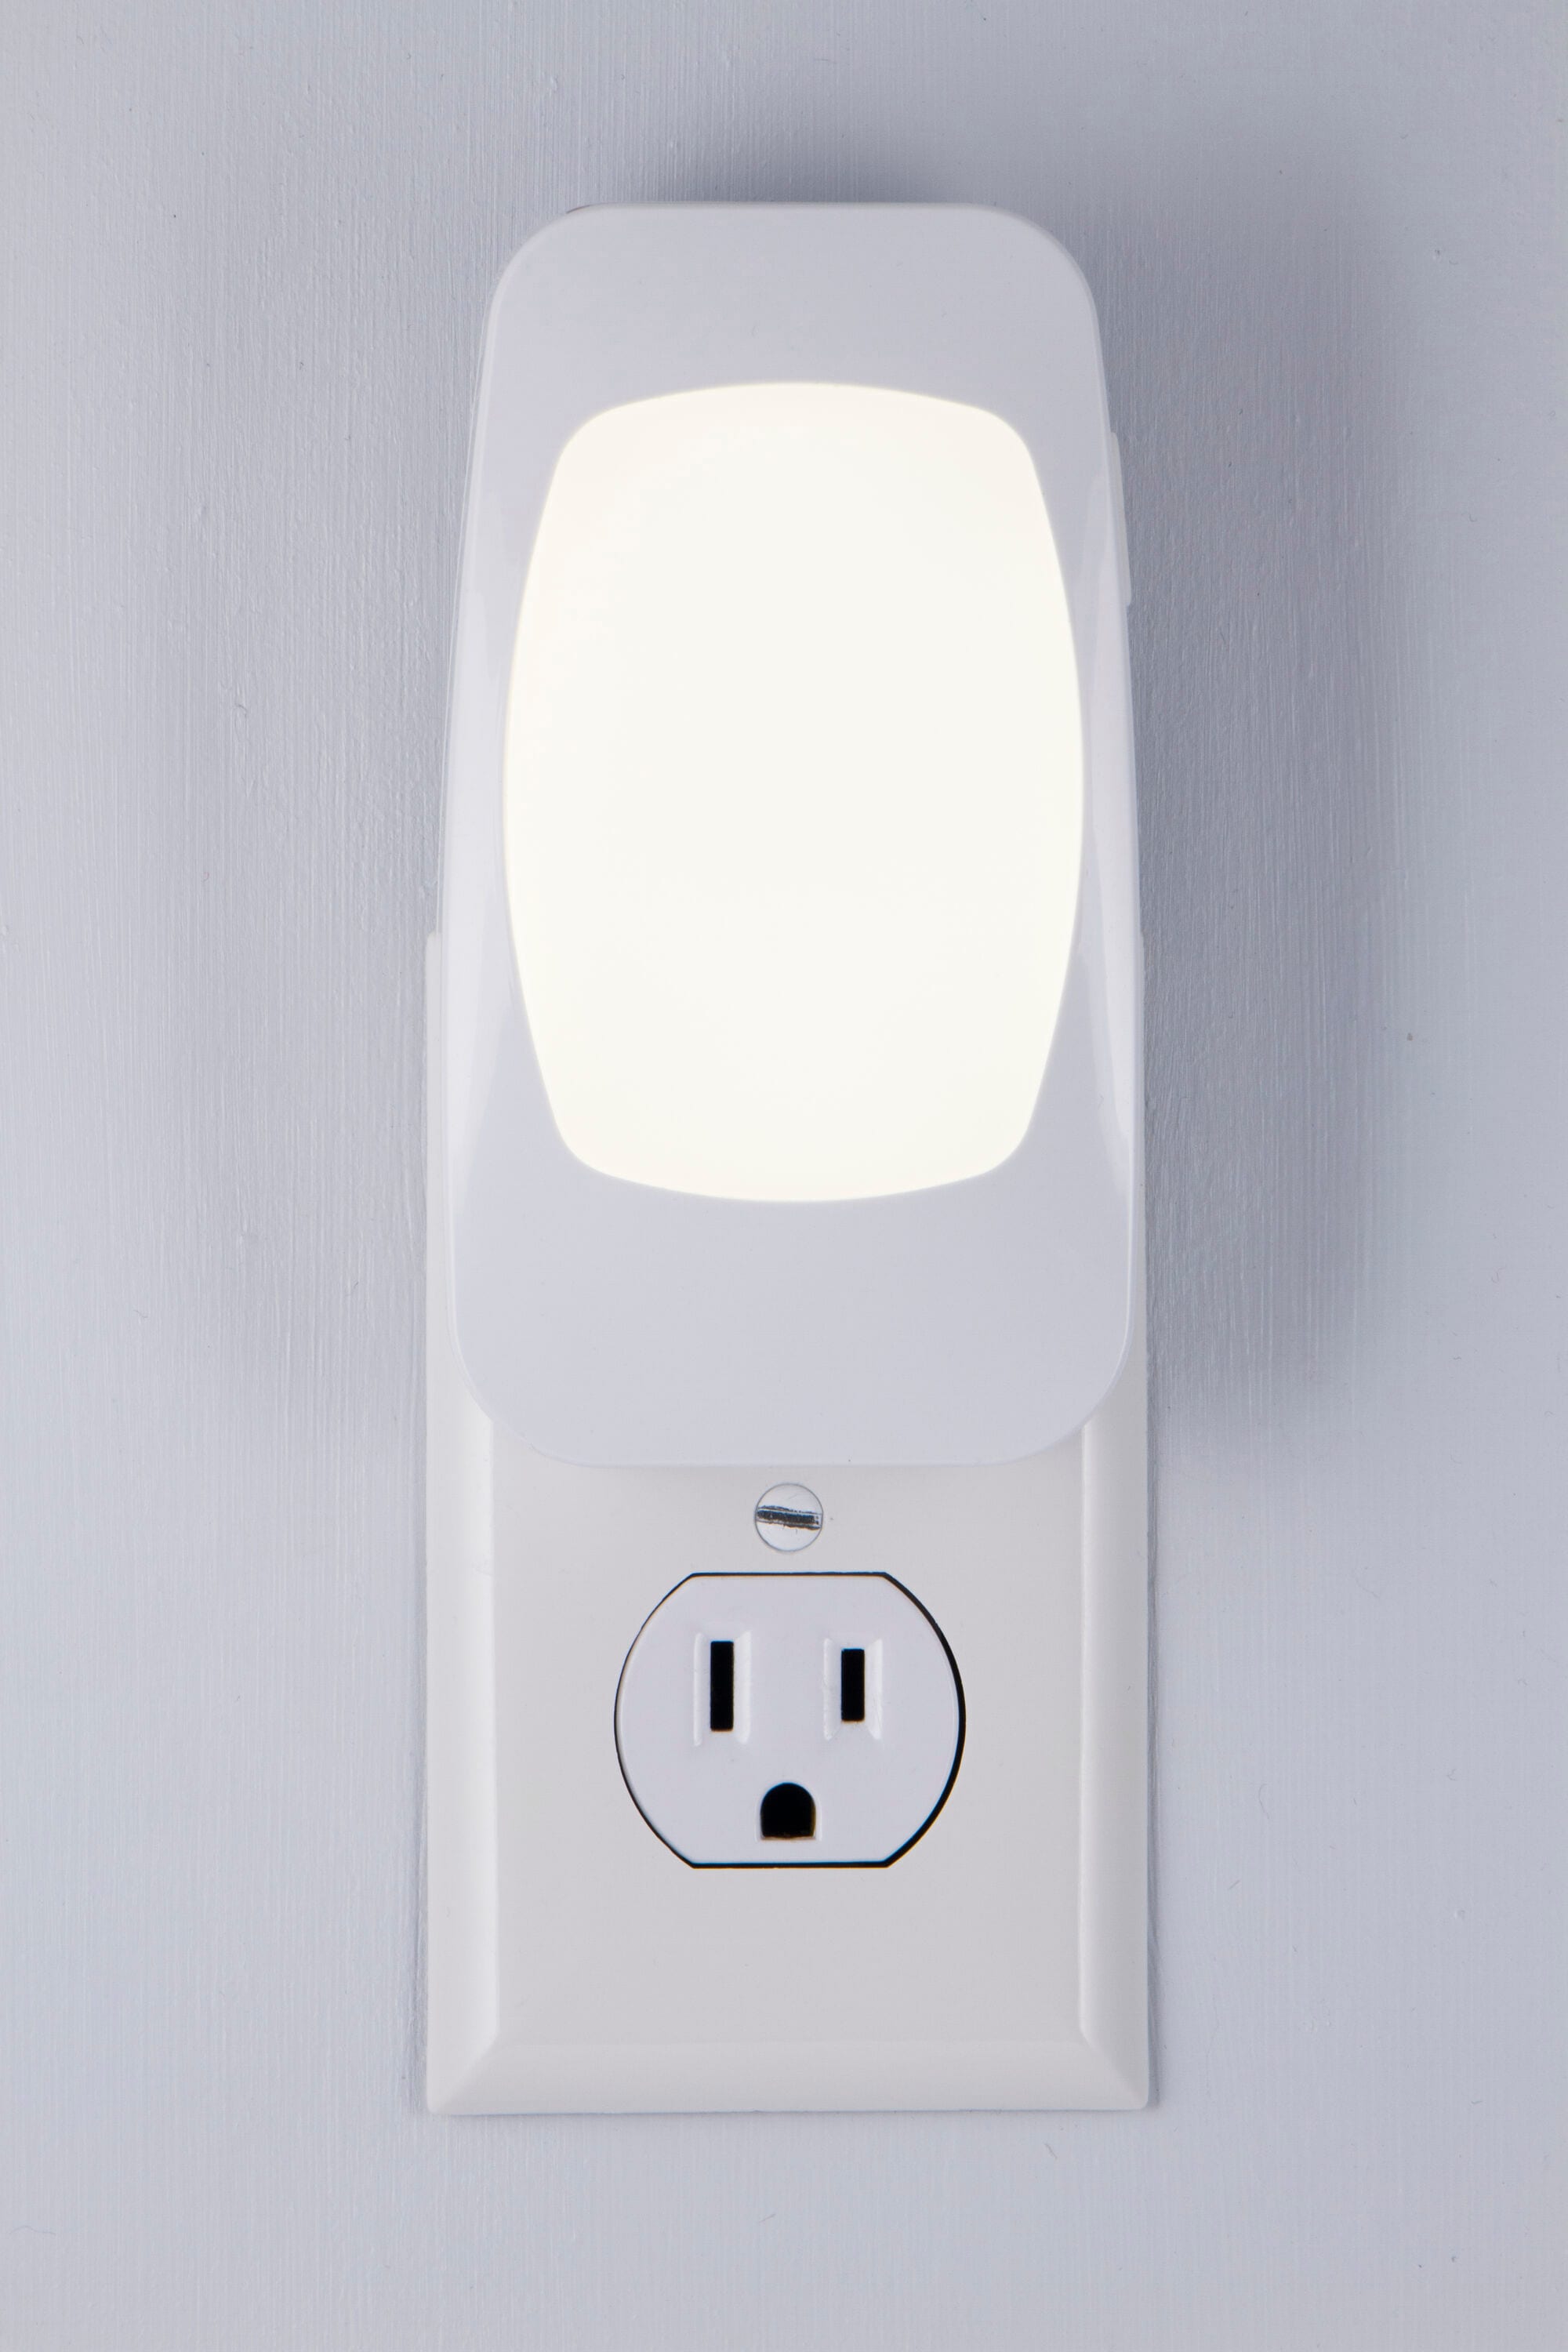 GE 4-in-1 Power Failure LED Night Light, Plug-in, Light Sensing,  Rechargeable